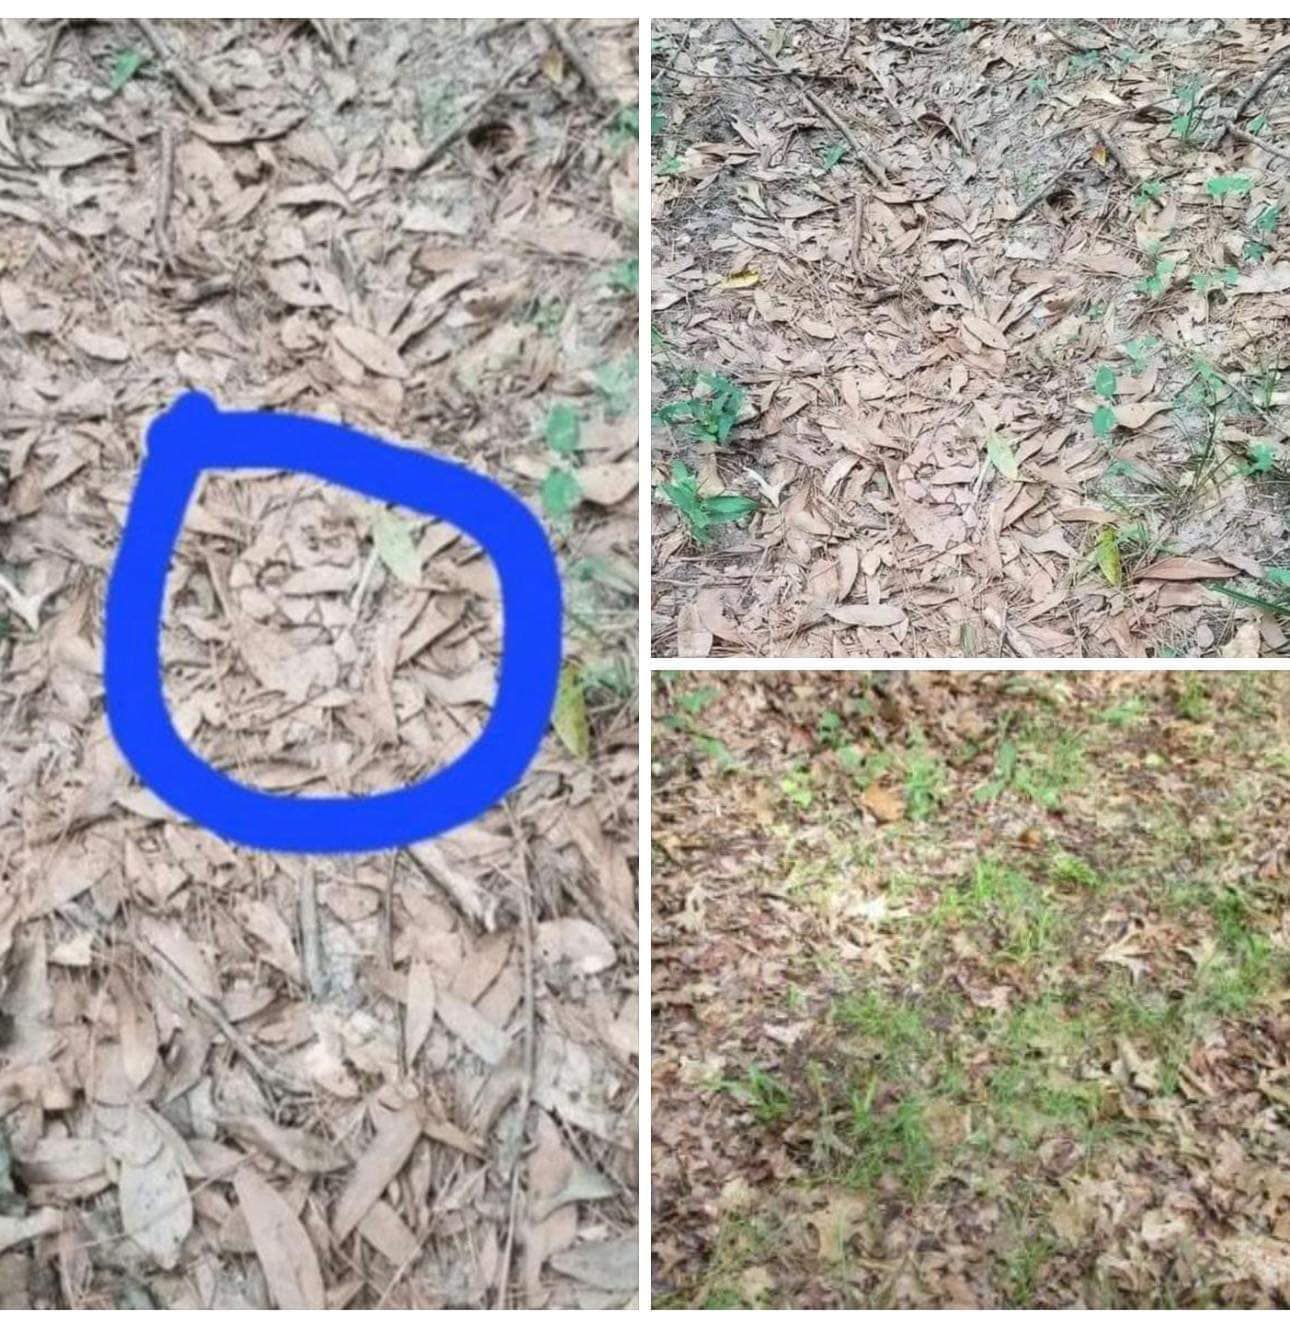 If you see leaves that look like this while out walking, you had better know what it could mean